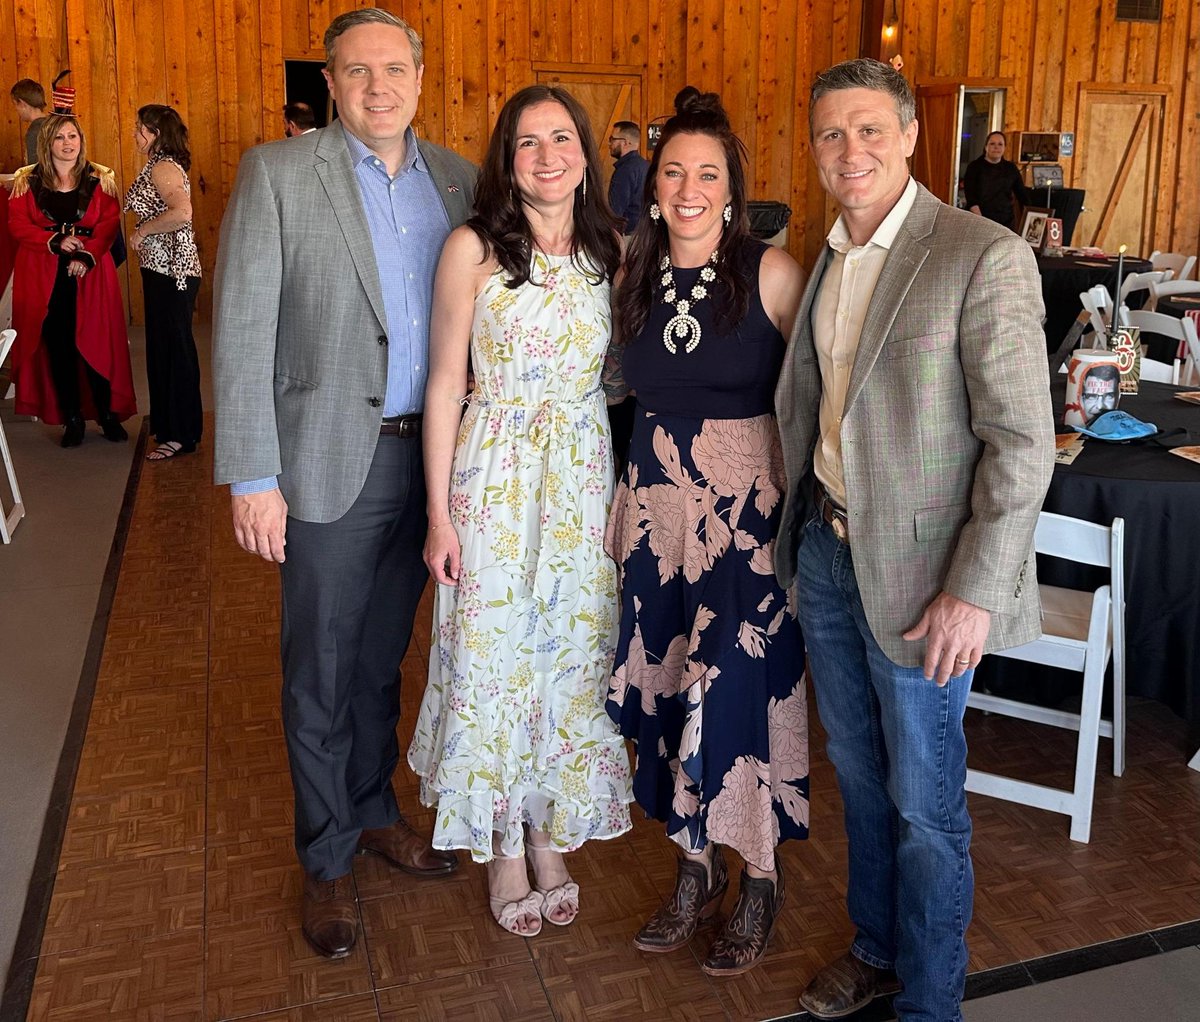 Barbora and I were happy to join the Fruita Area Chamber for its annual banquet. If you believe in thriving local economies fueled by the dreams and hard work of small business owners, I am eager to be your voice. #FruitaChamber #CO03